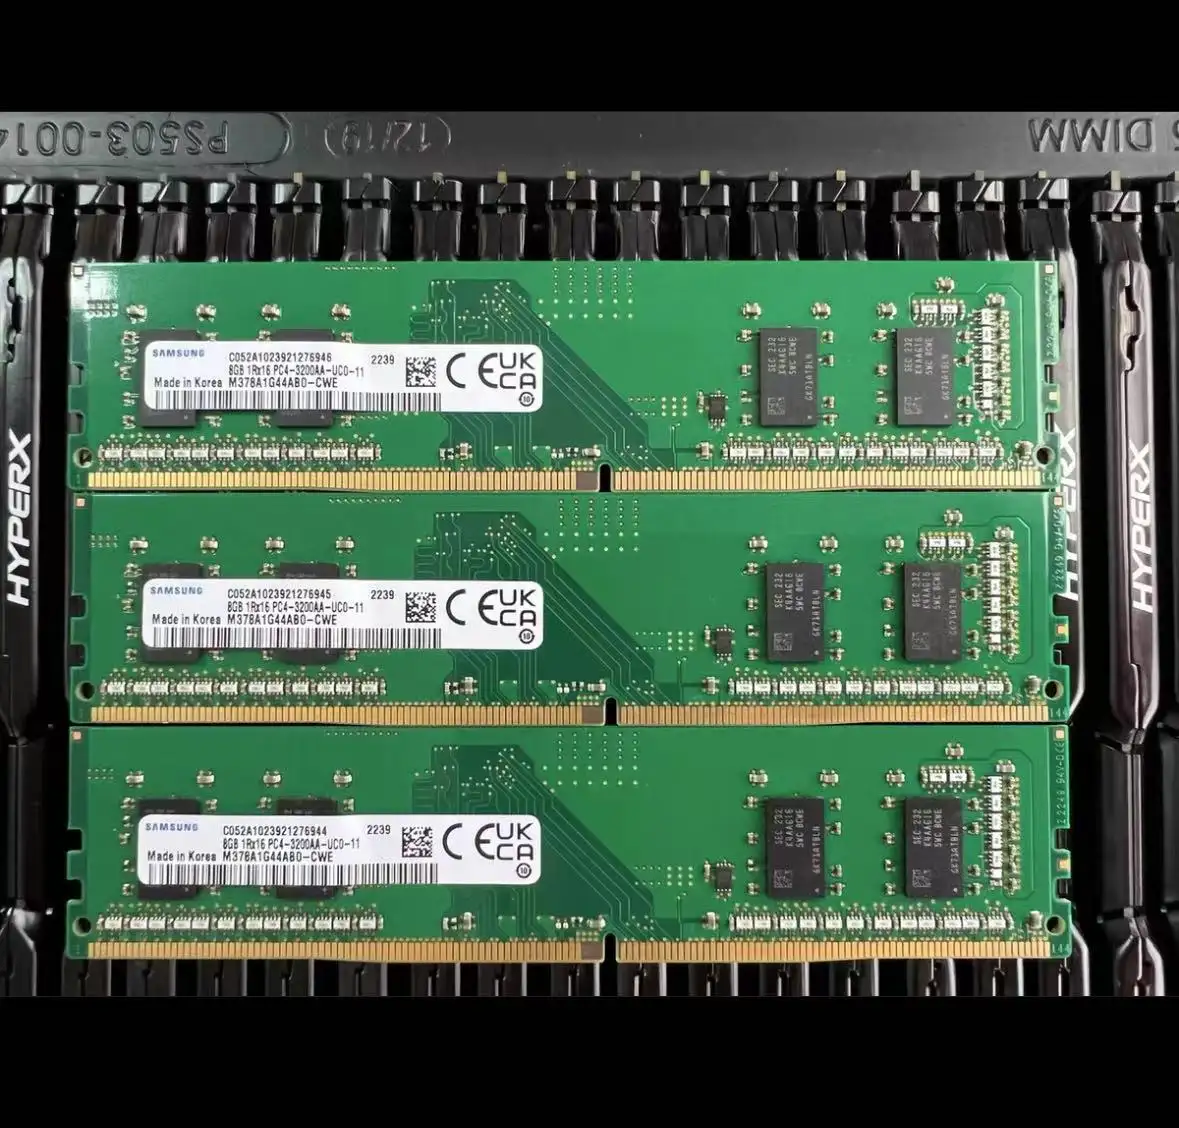 DDR4 DDR5 memory module has a good price. The brand new GM made in China 32G